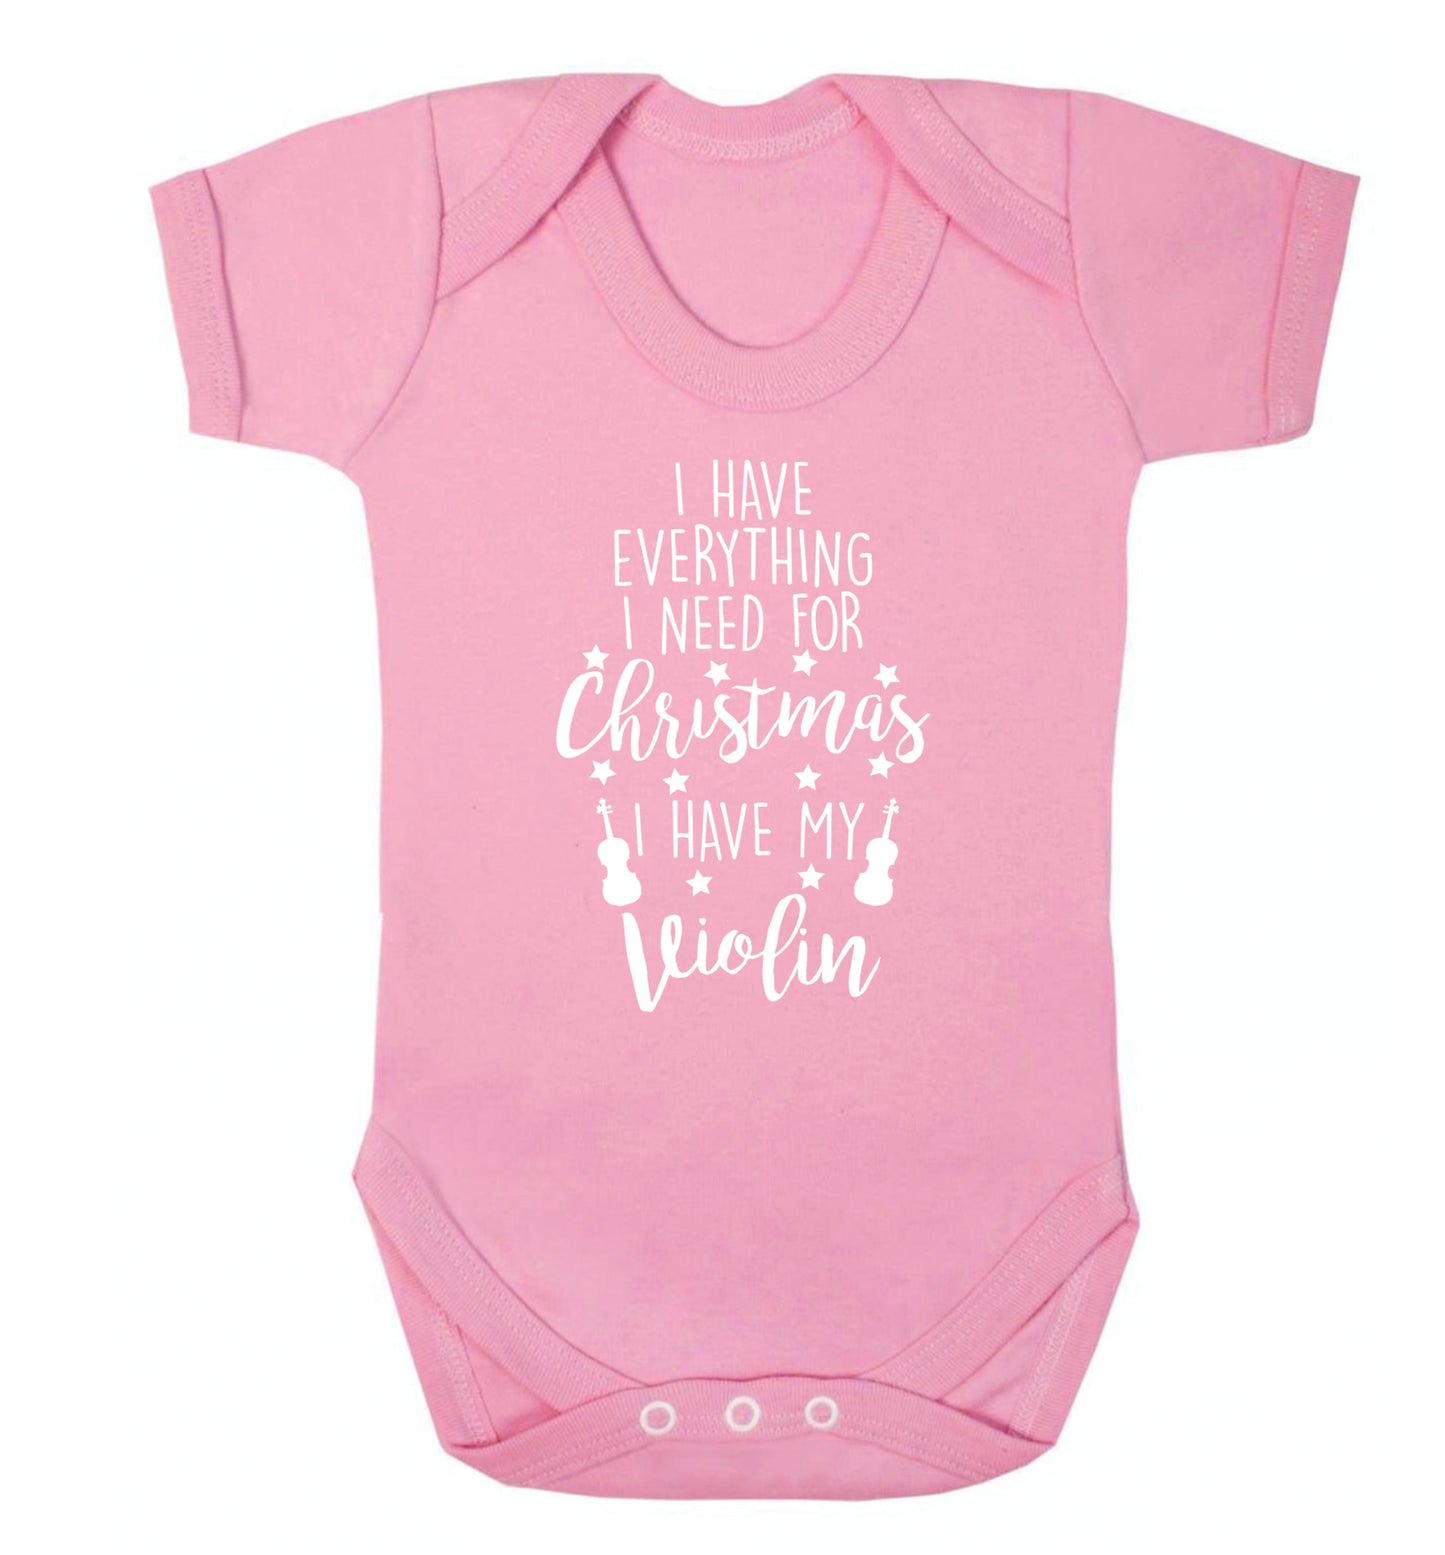 I have everything I need for Christmas I have my violin Baby Vest pale pink 18-24 months